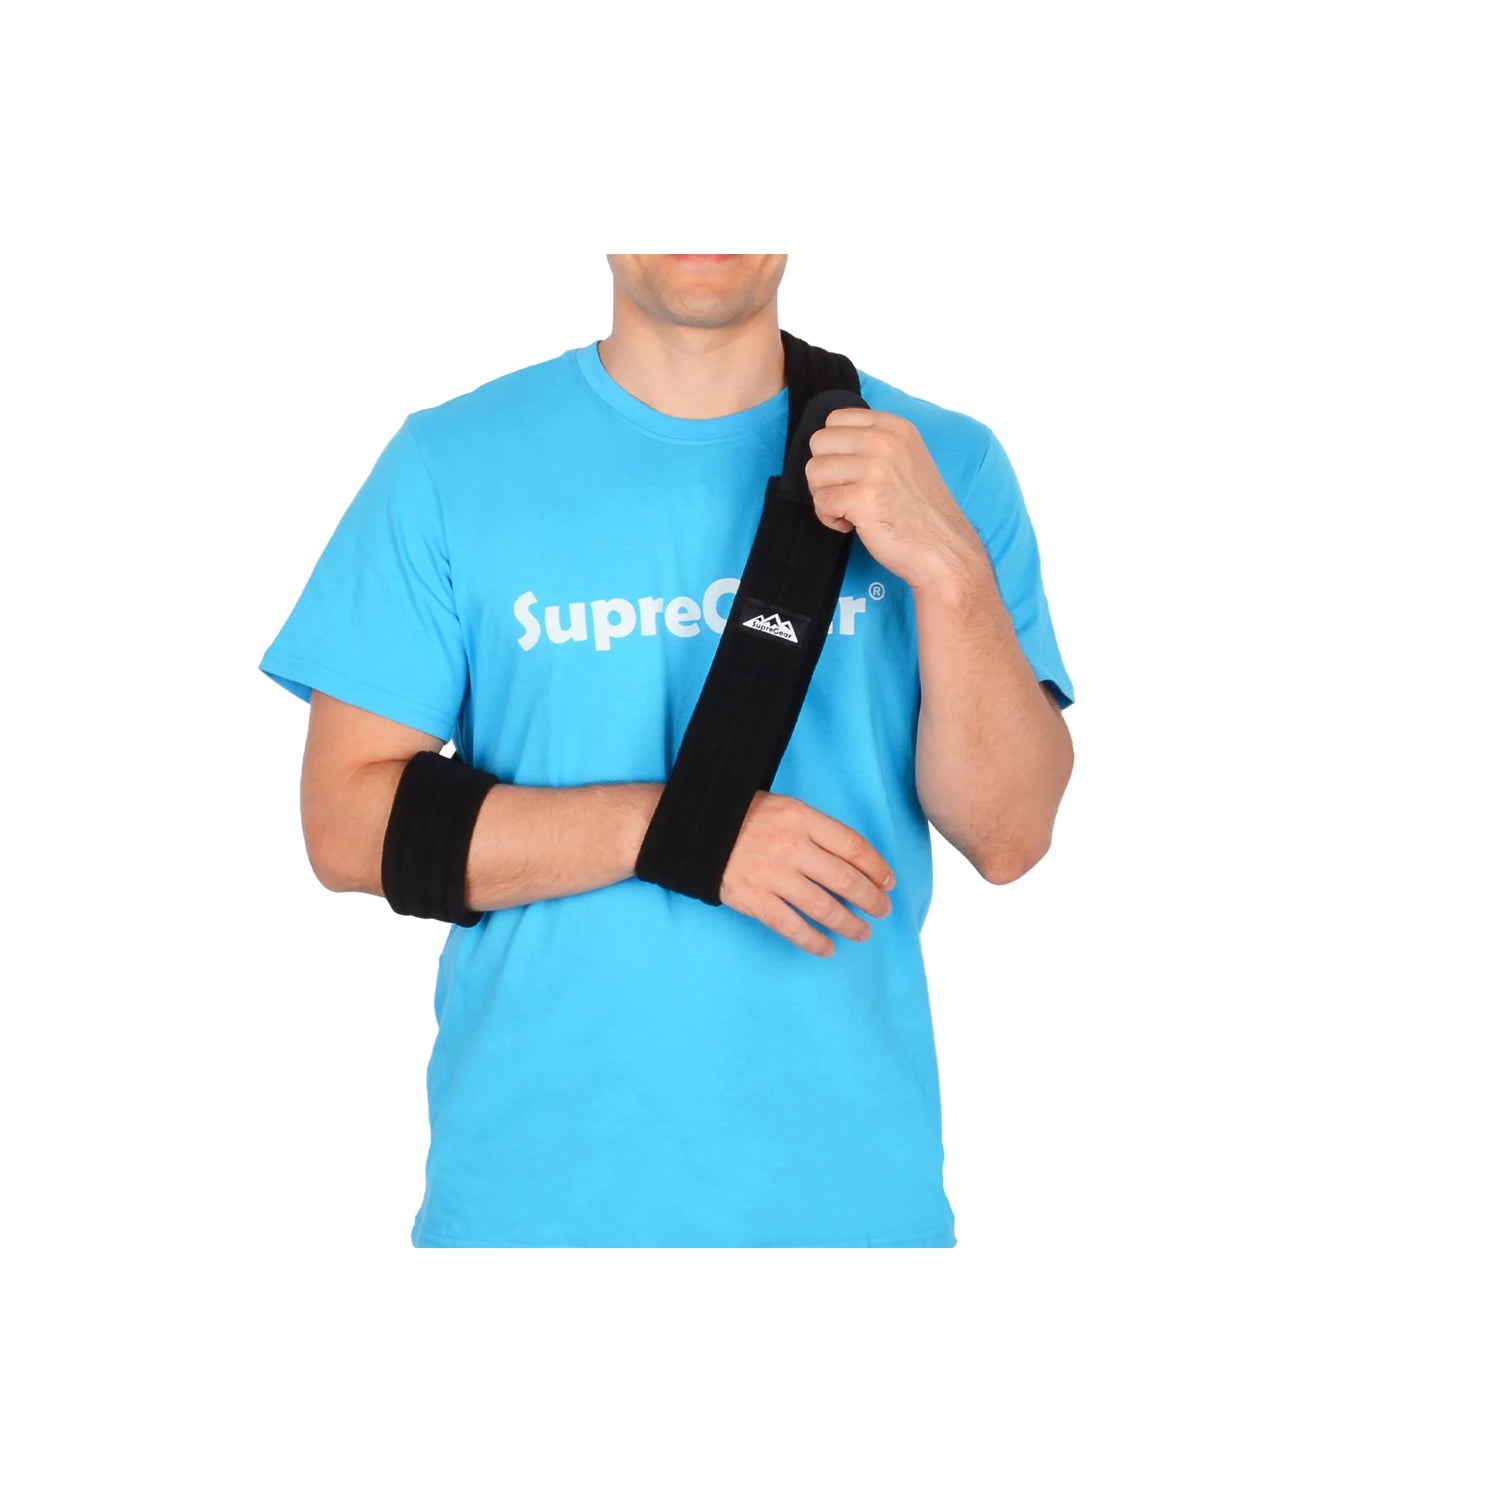 Double fixation Arm Sling Support Shoulder Arm Dislocation Wrists Joint  Sprain Forearm Fracture Fixation Elbow Joints Treatments - AliExpress